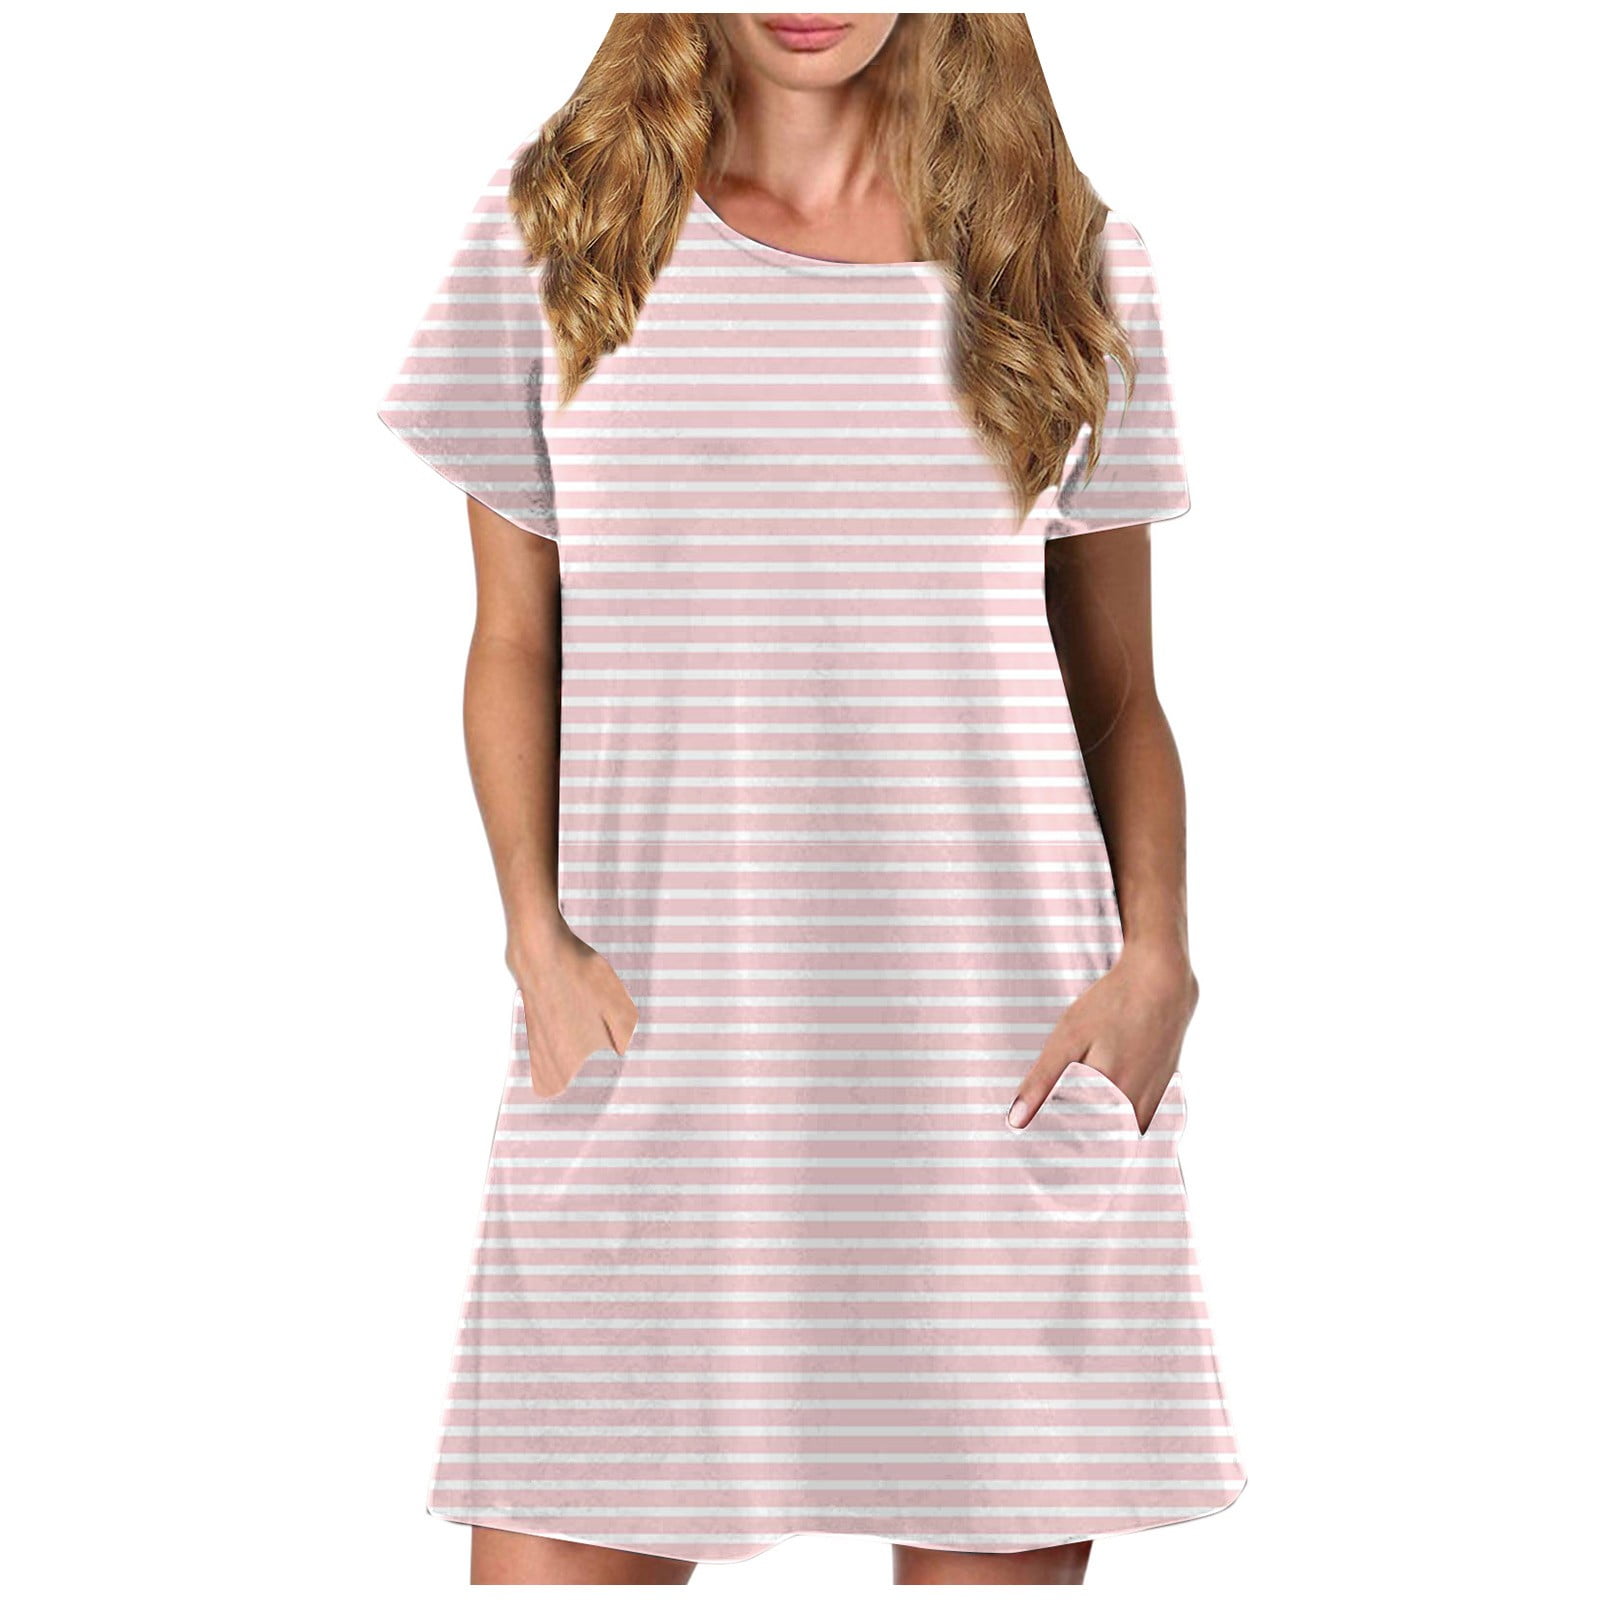 BEEYASO Clearance Summer Dresses for Women Round Neckline Striped Mini  Casual Short Sleeve Dress Pink 2XL 